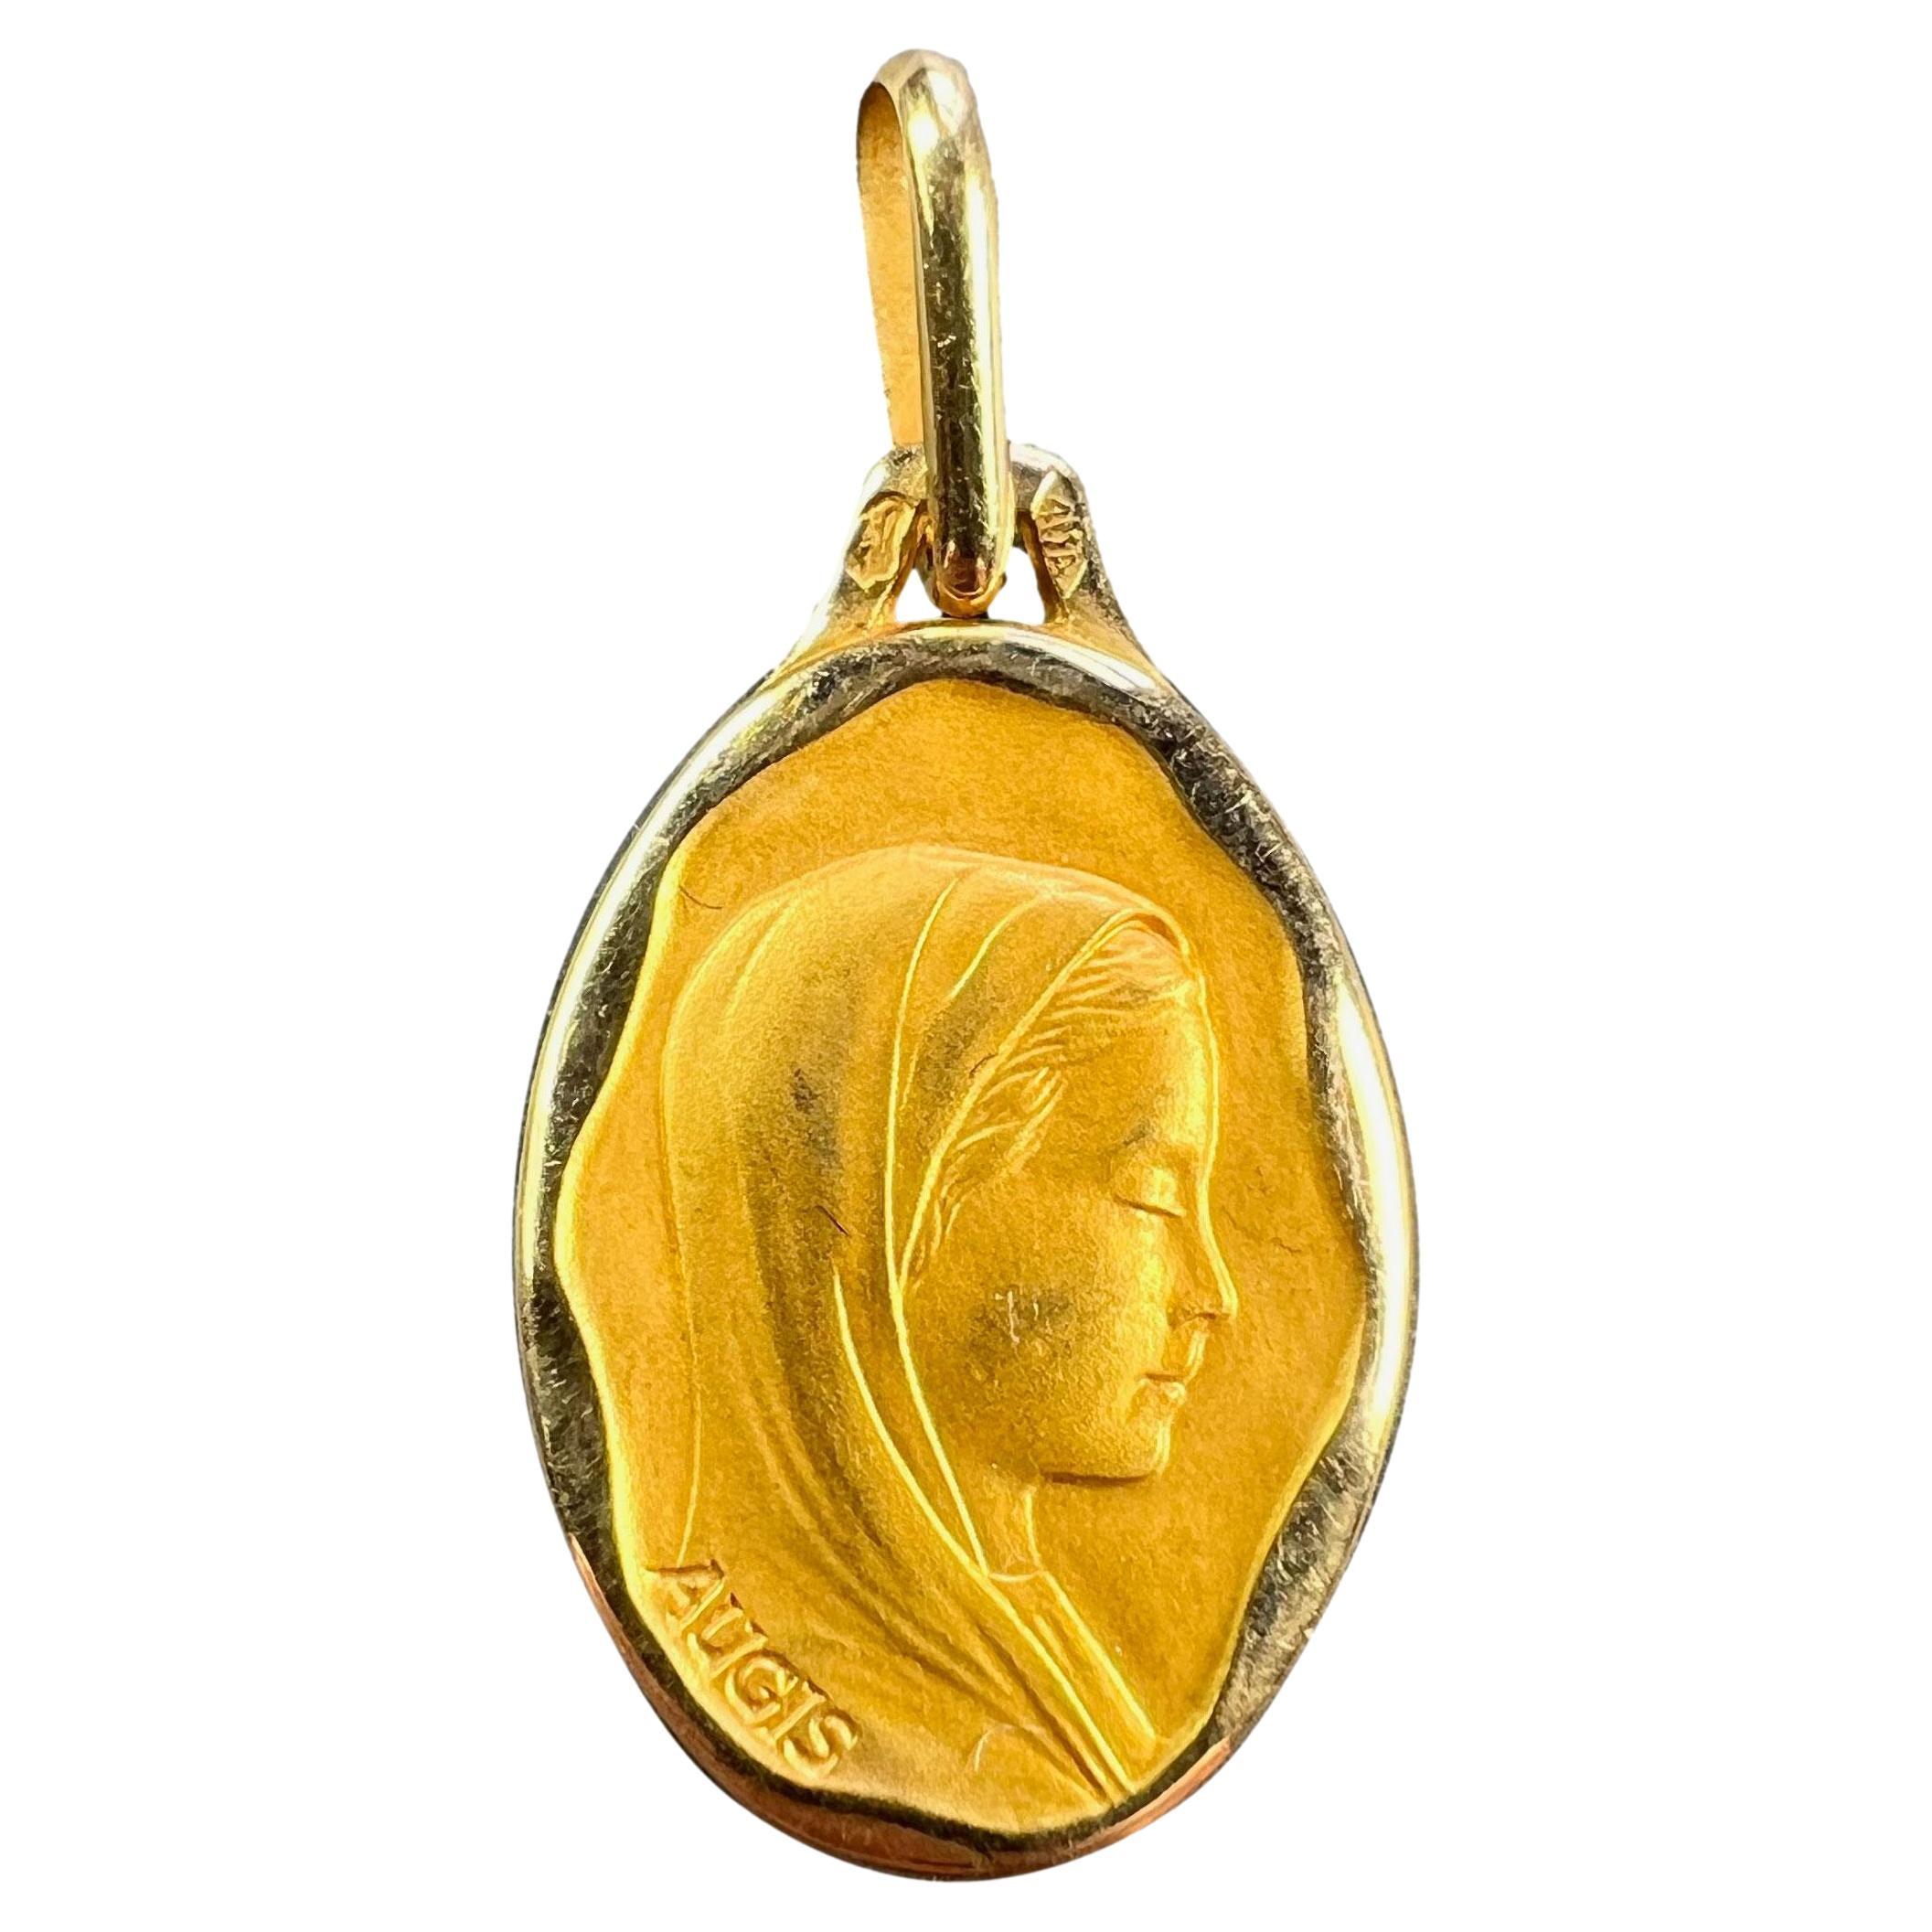 French Augis Virgin Mary 18K Yellow Gold Religious Medal Pendant